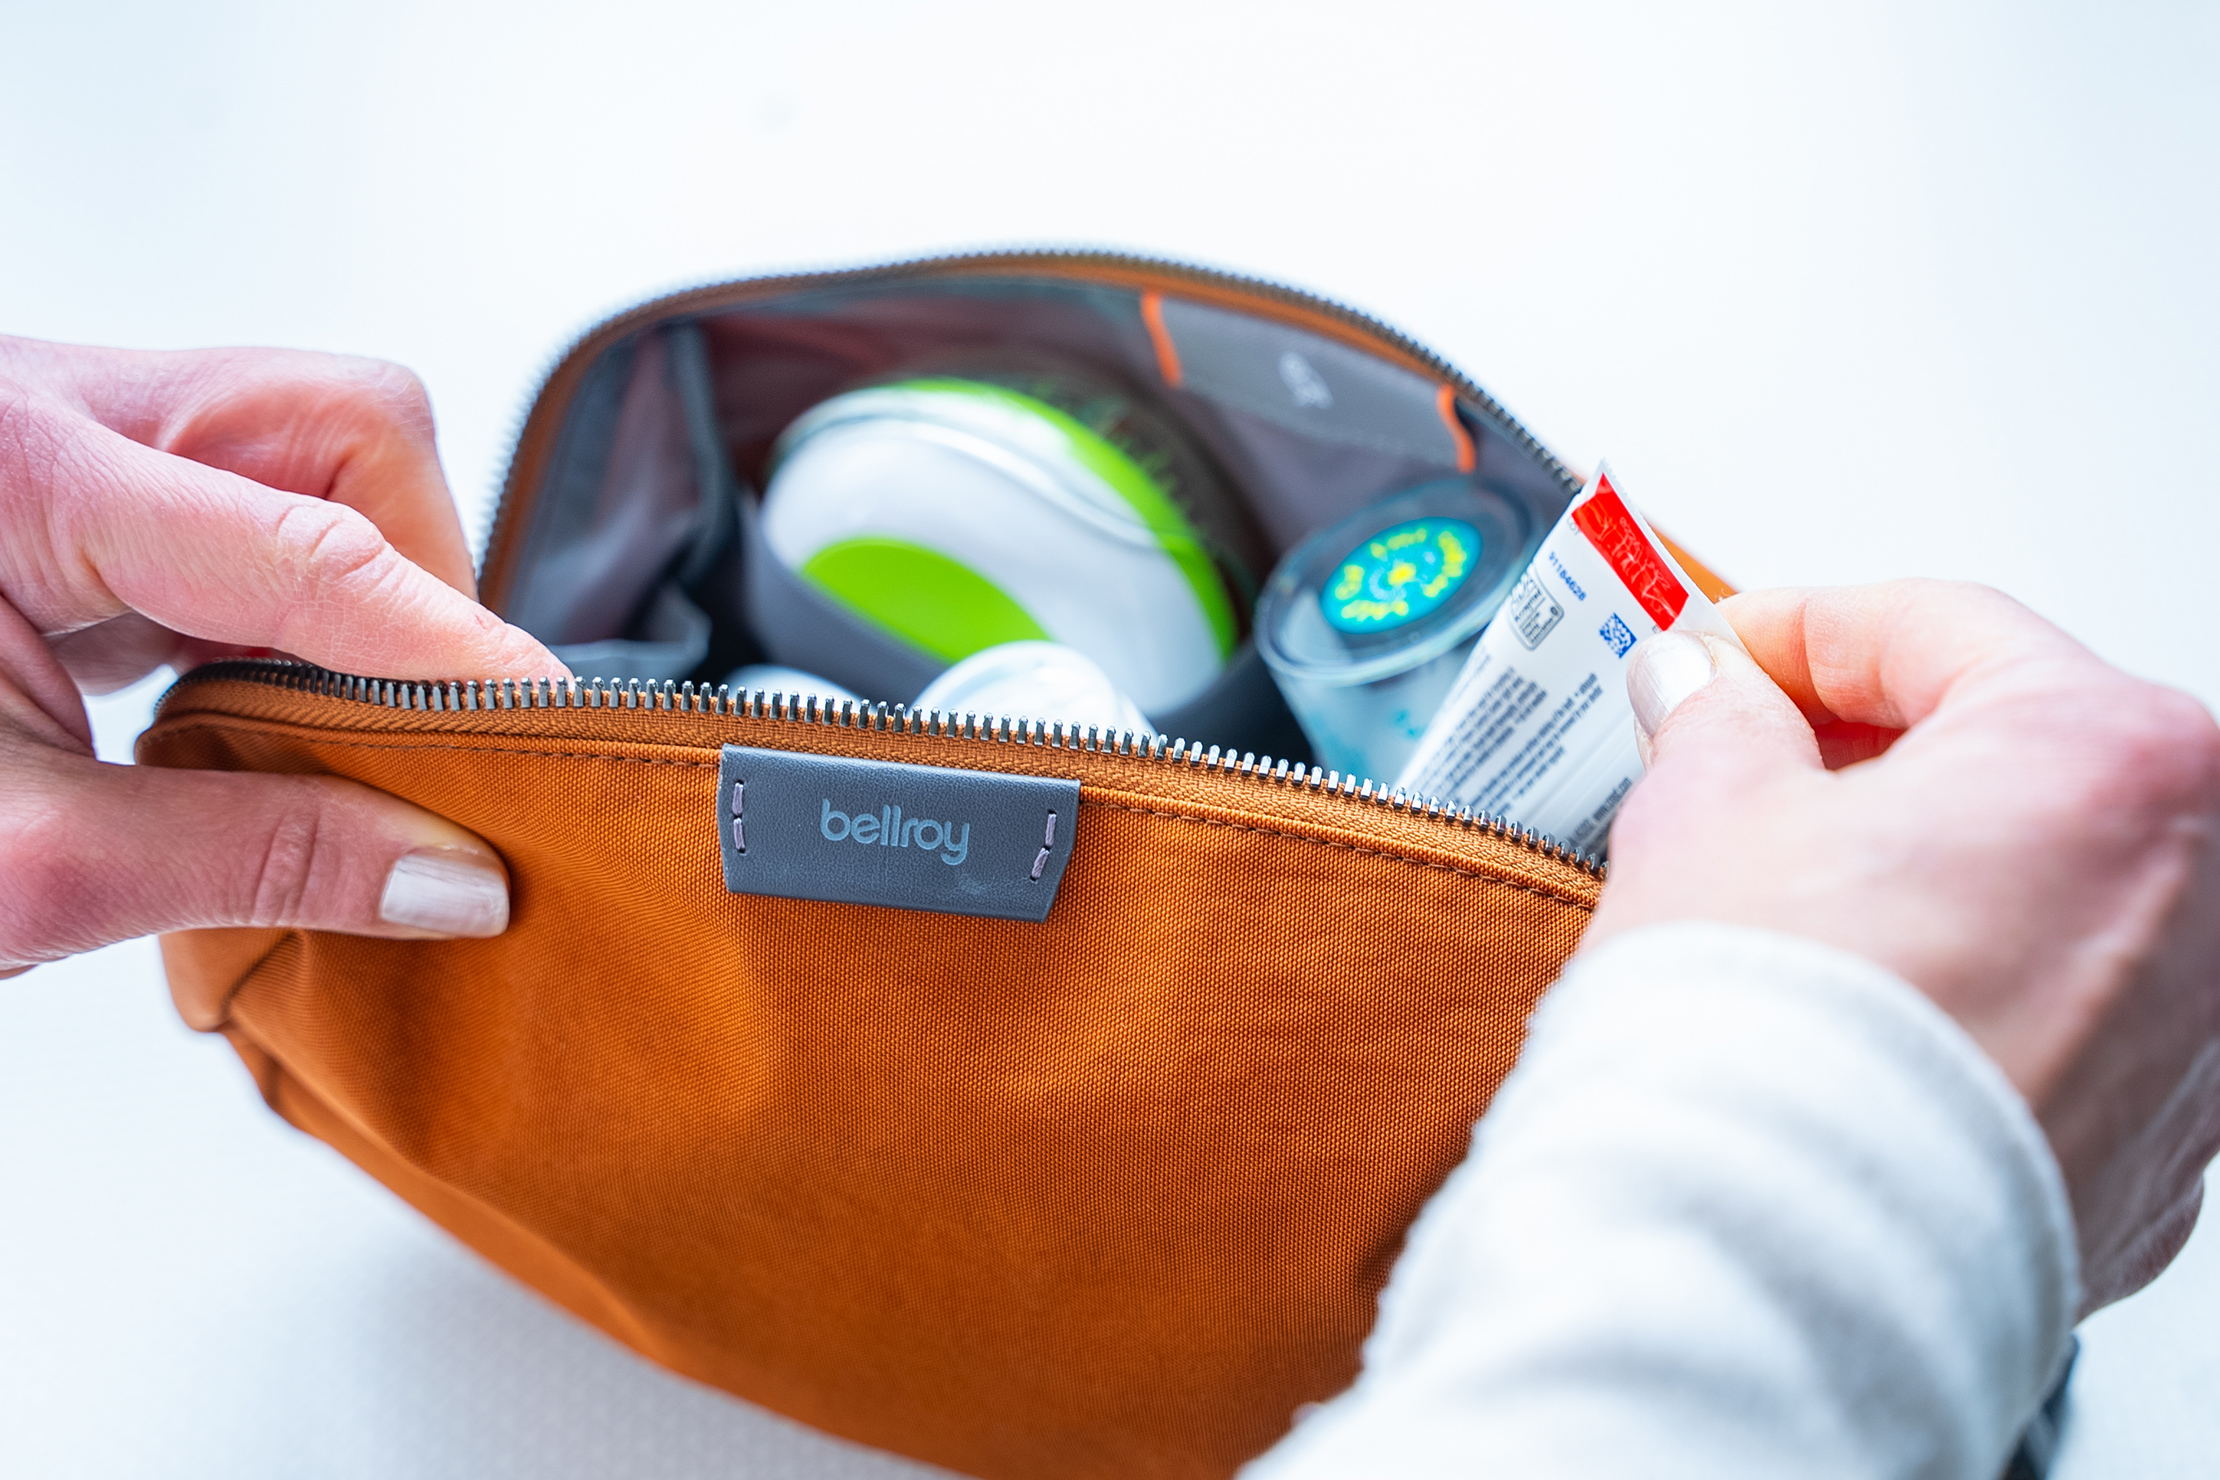 Bellroy Toiletry Kit Plus in Use